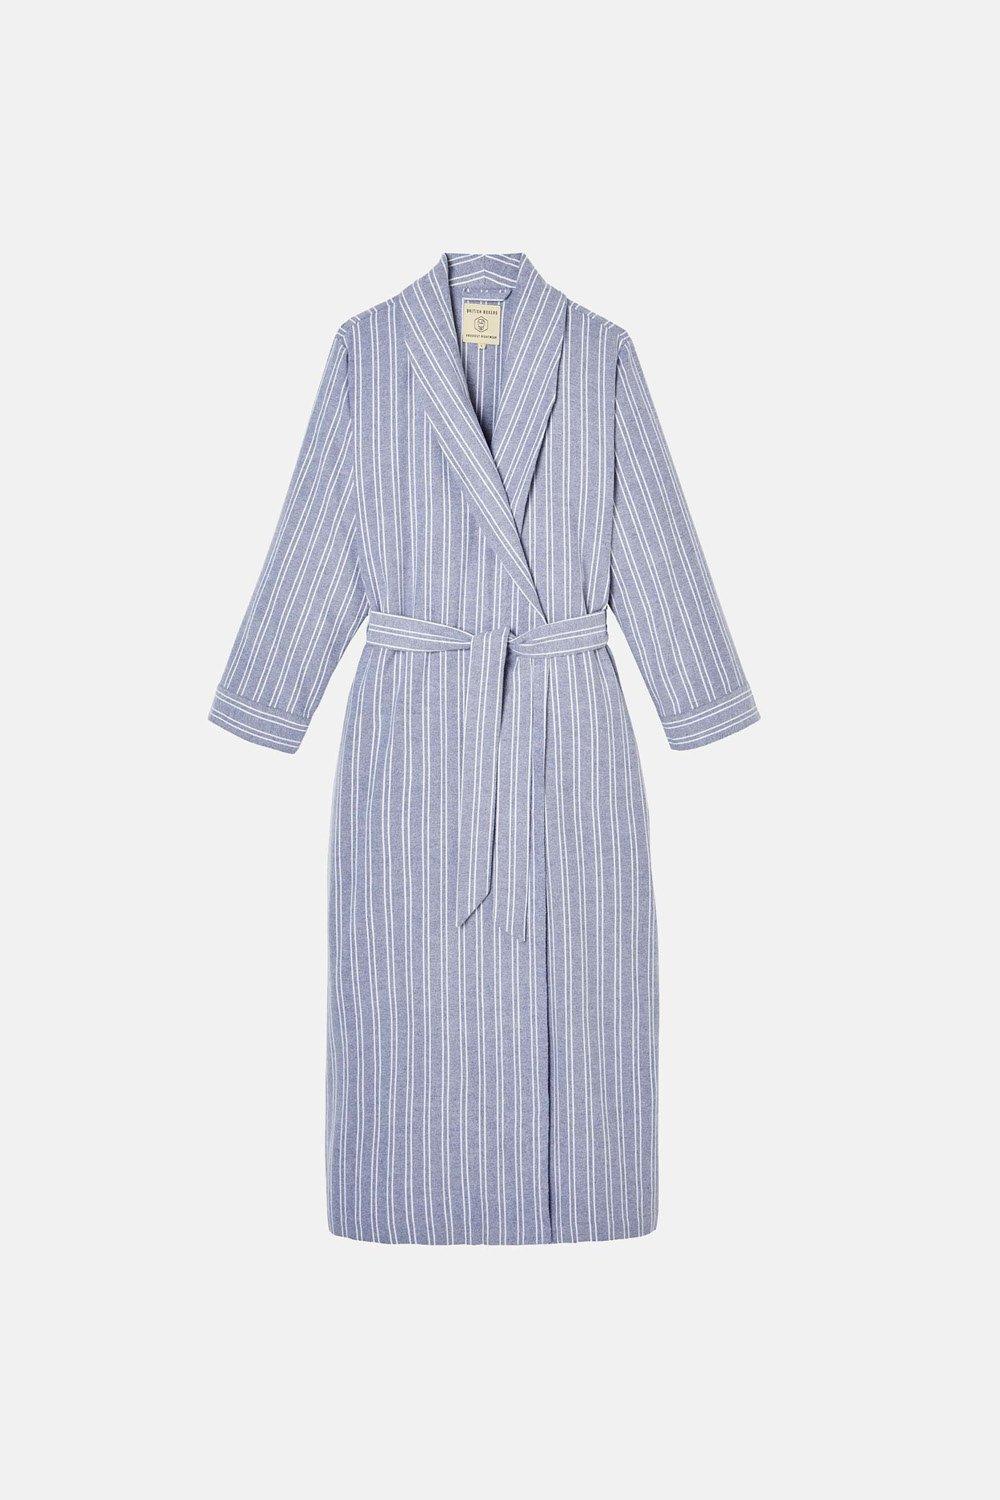 'Westwood' Pebble Brushed Cotton Dressing Gown